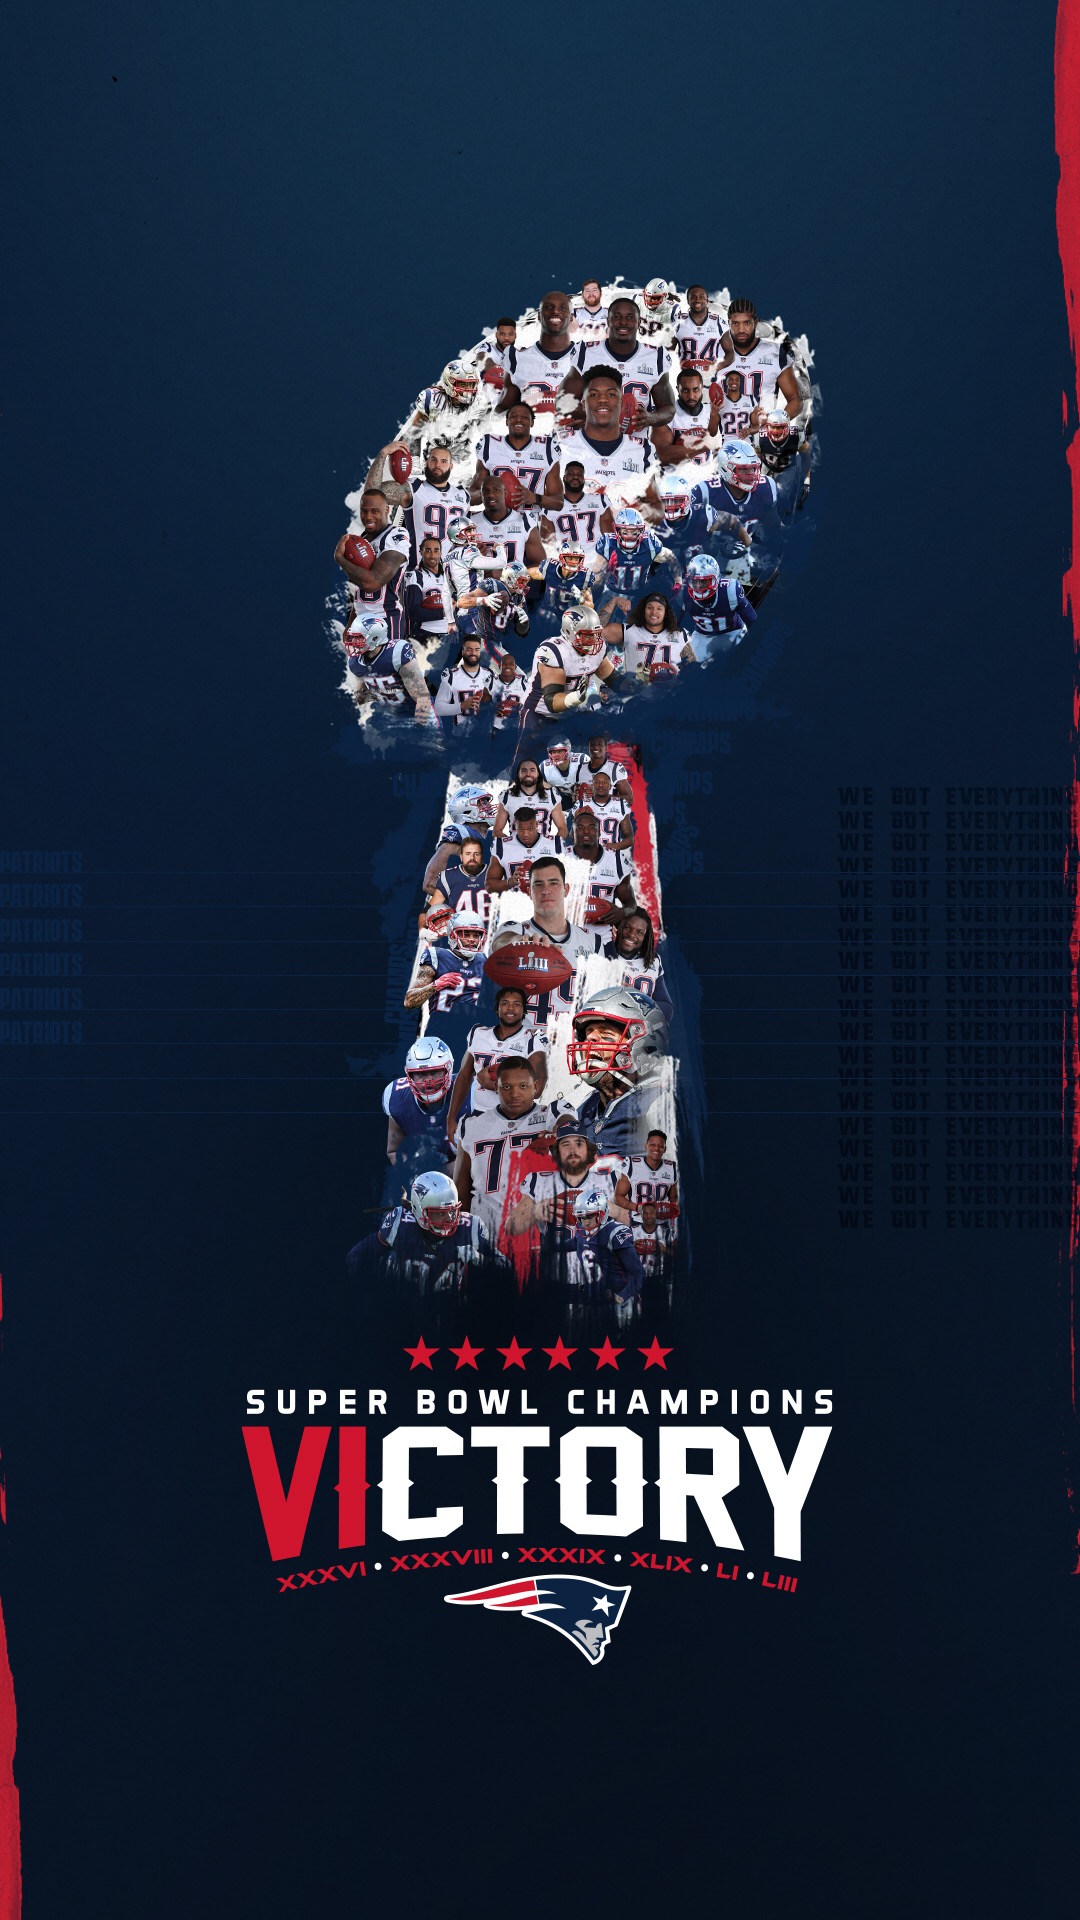 New England Patriots IPhone Wallpaper 83 images